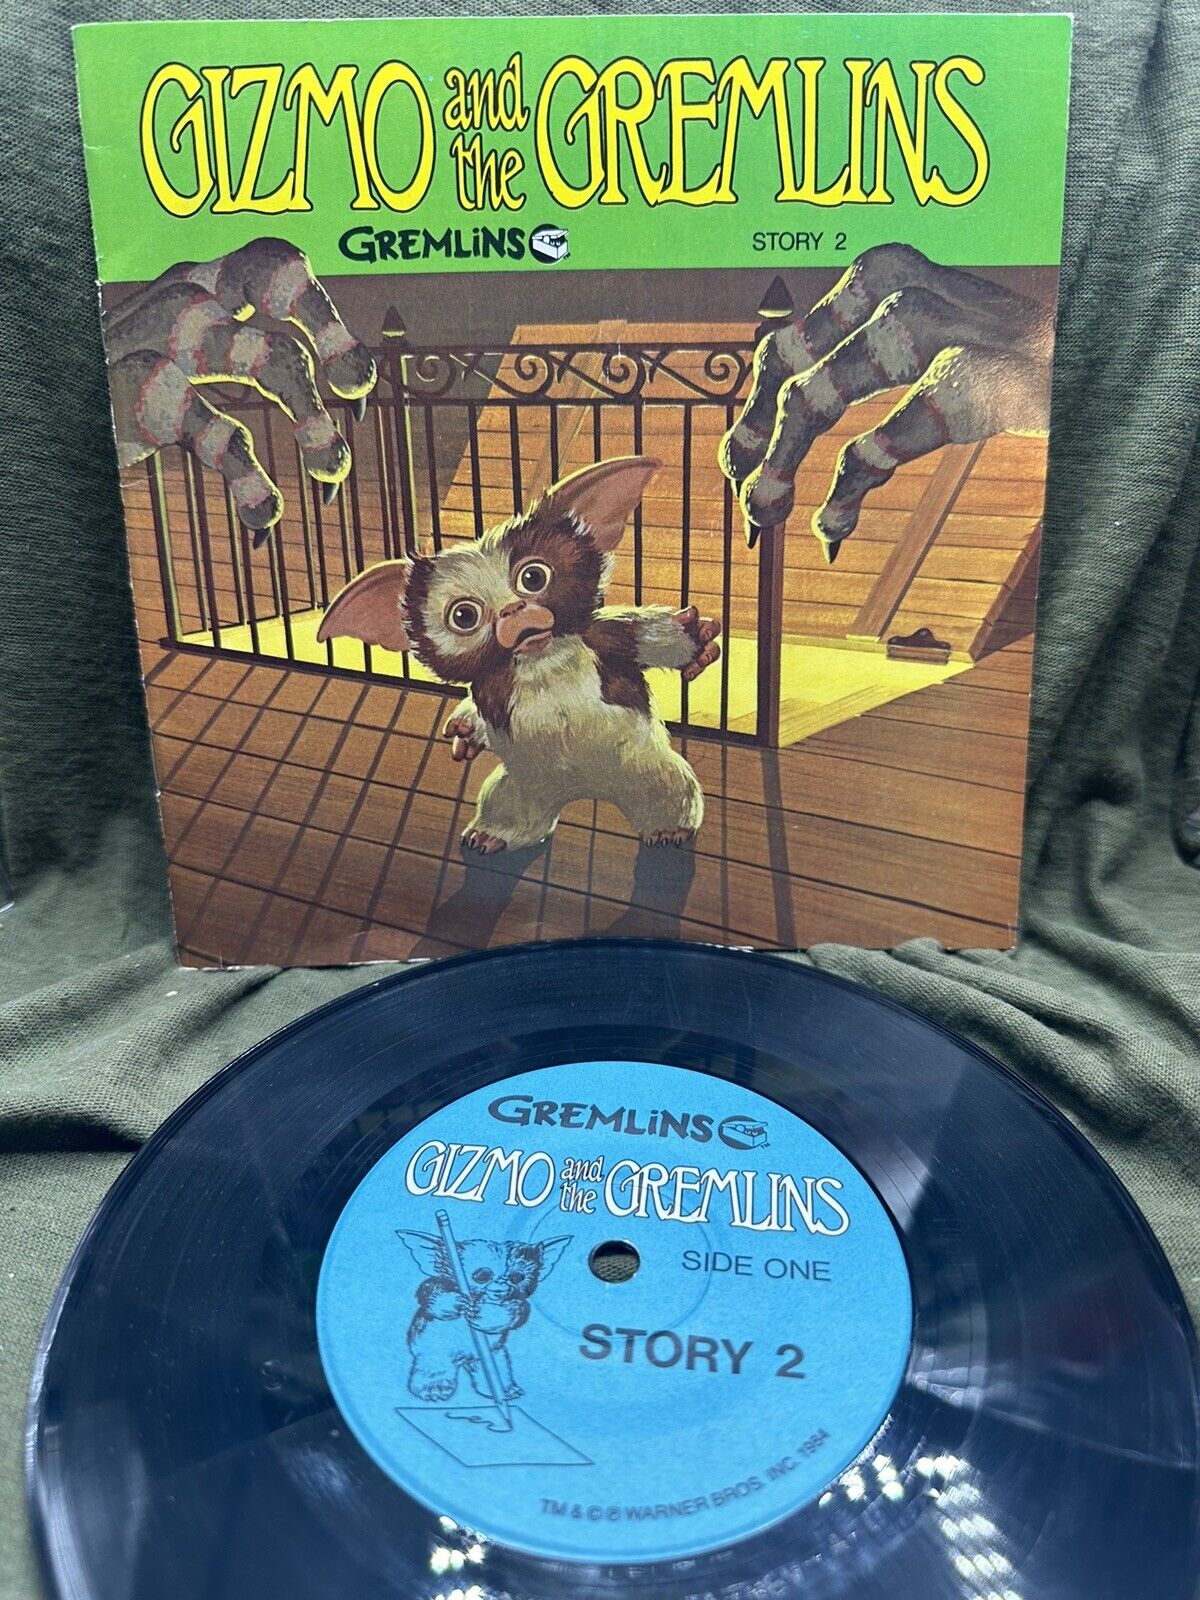 Vintage 1984 Gizmo and the Gremlins Book/Record Story 2.  Book & VINYL 33 1/3